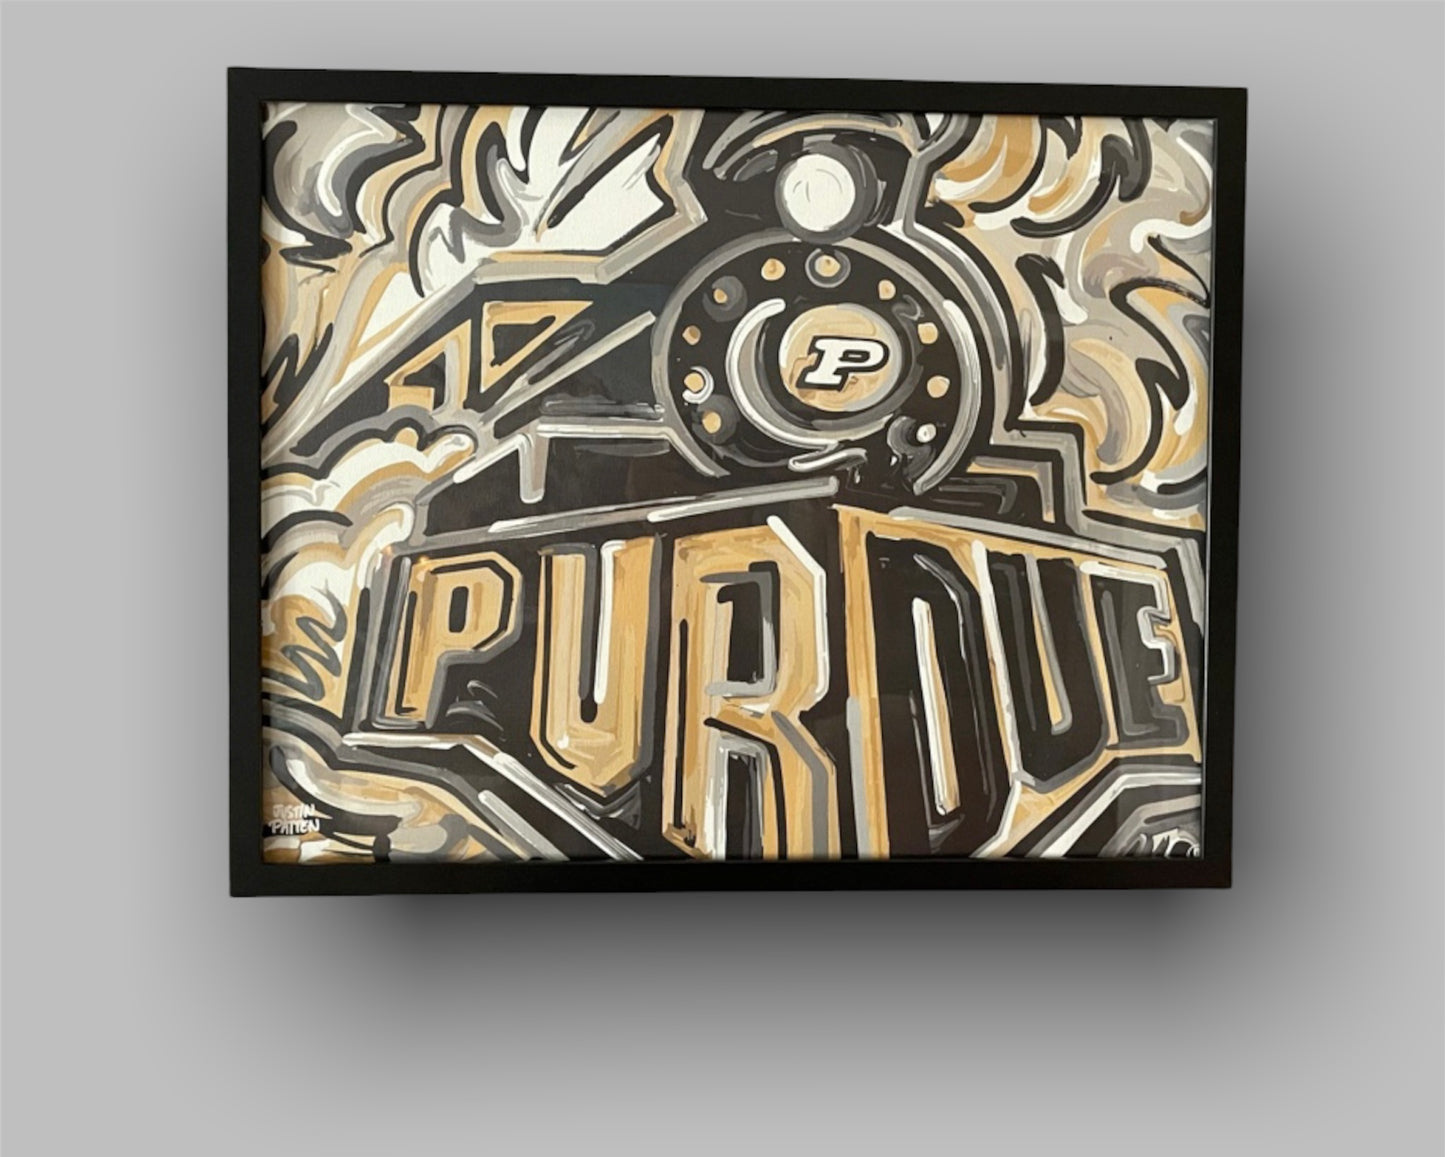 Purdue 20"x16" Boilermaker Special Vintage Style Print by Justin Patten